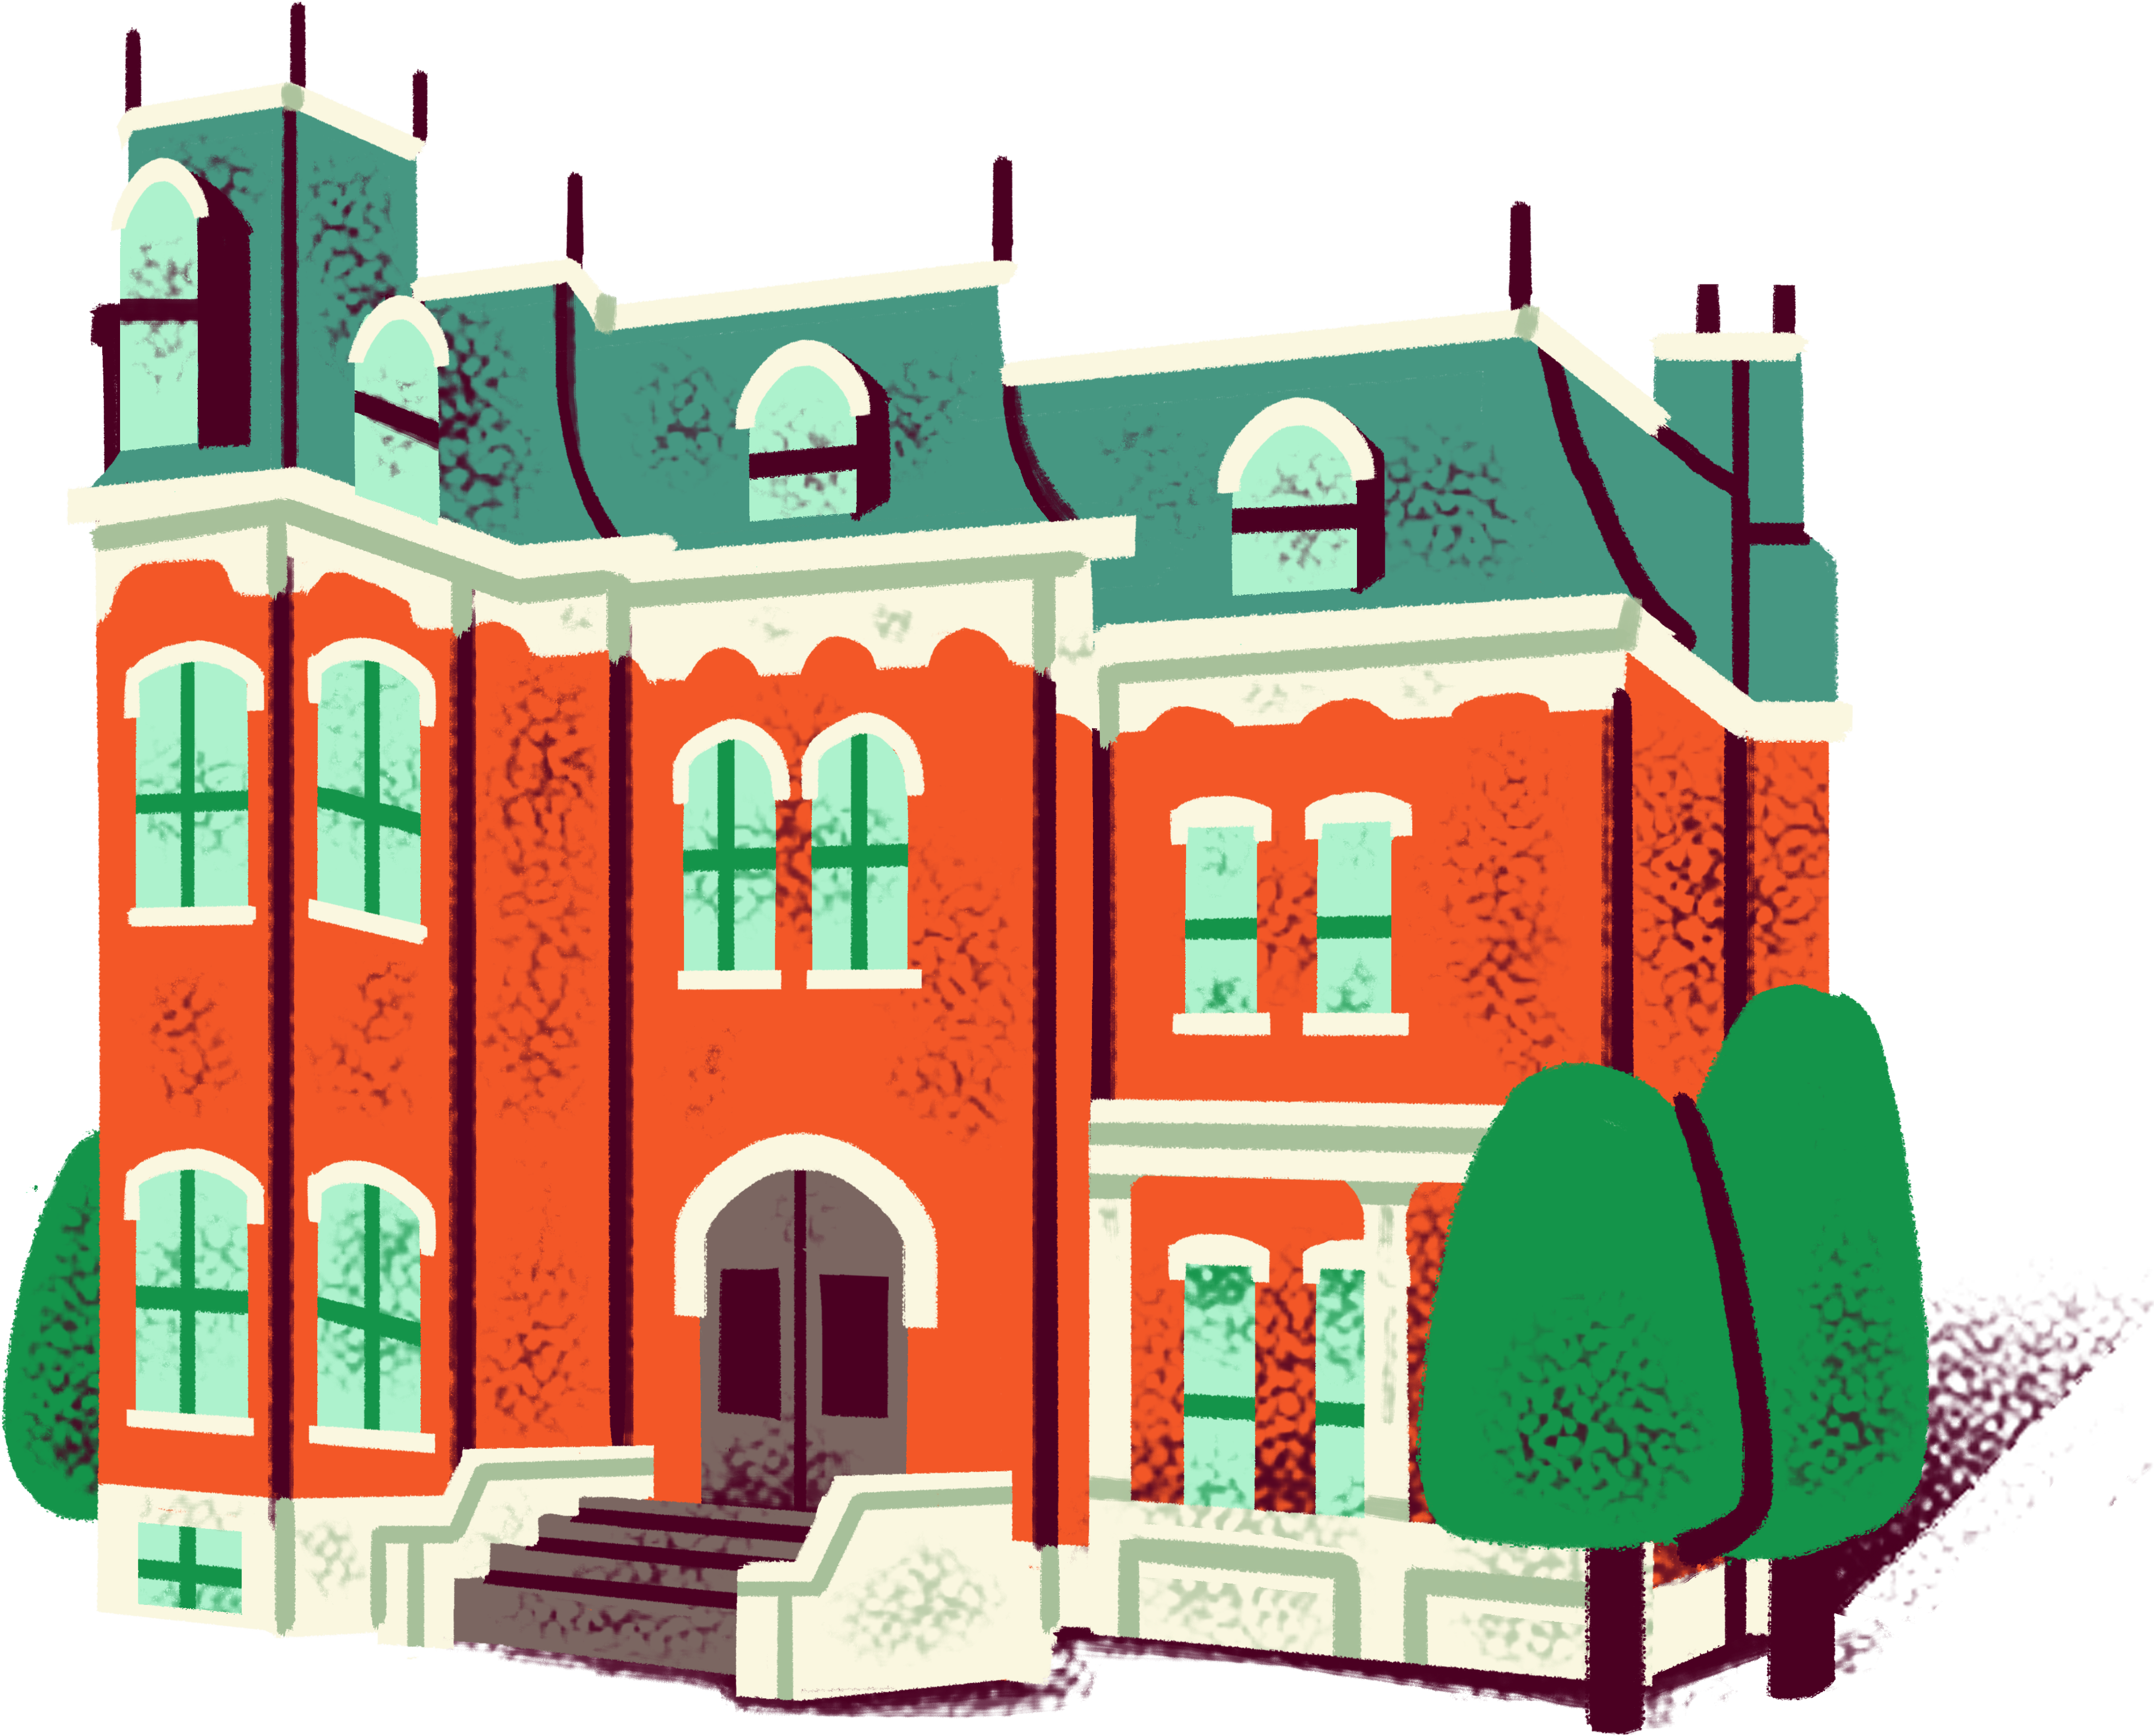 Illustration of a historic building from the 1800s